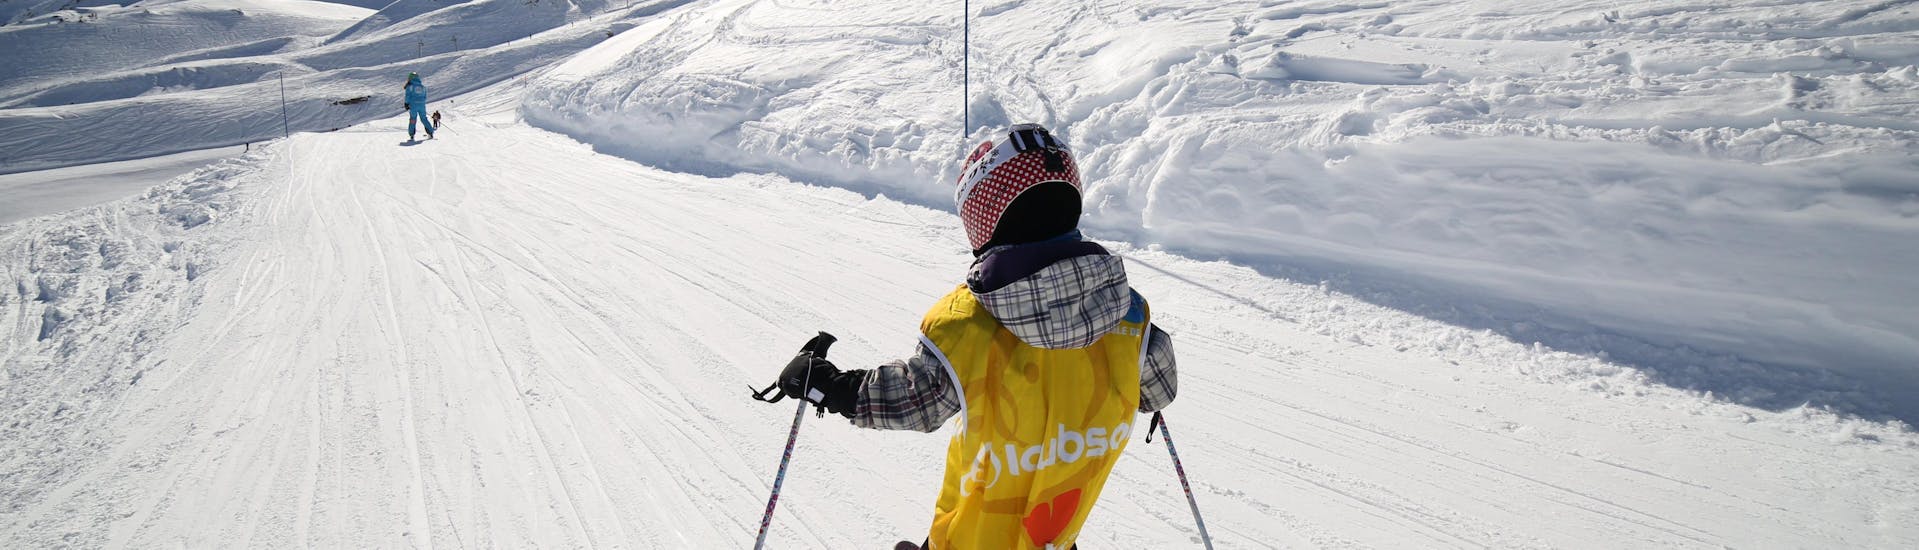 A young skier is skiing down a snowy slope during his Private Ski Lessons for Kids - Holiday - All Ages with the ski school ESI Font Romeu.